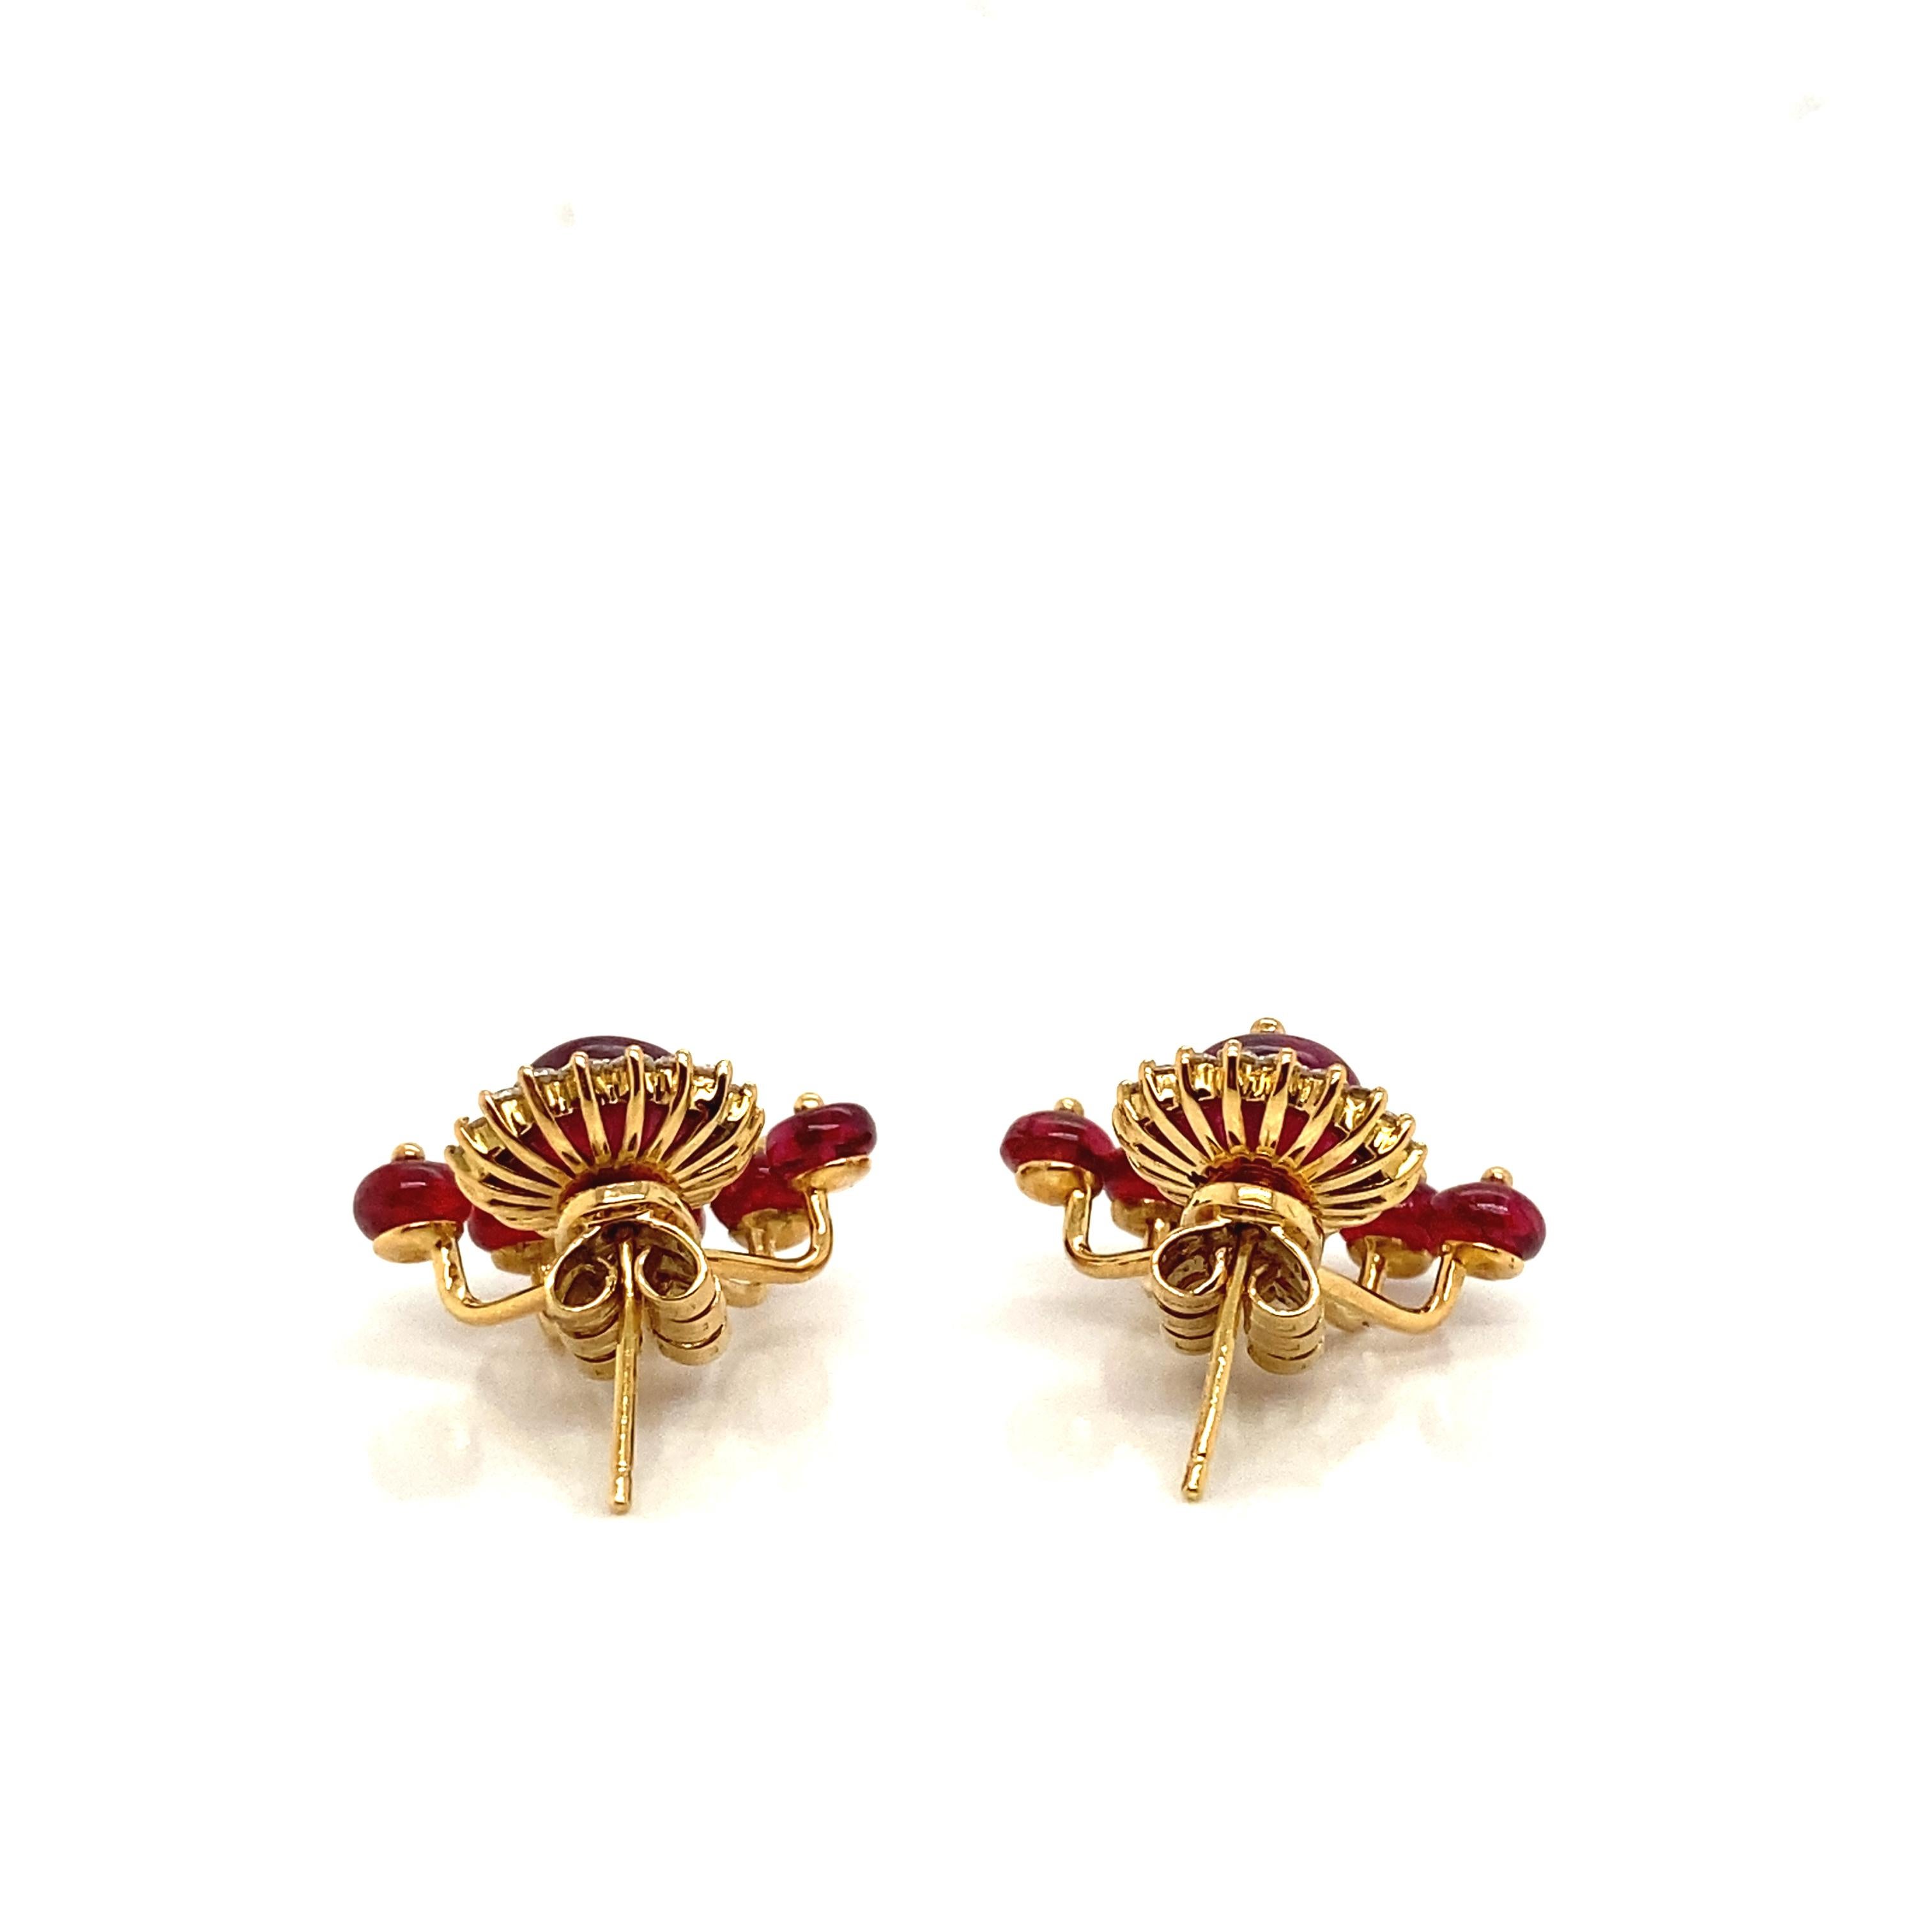 12.98 Carat Natural Red Spinel Beads and Diamond Gold Earrings For Sale 3